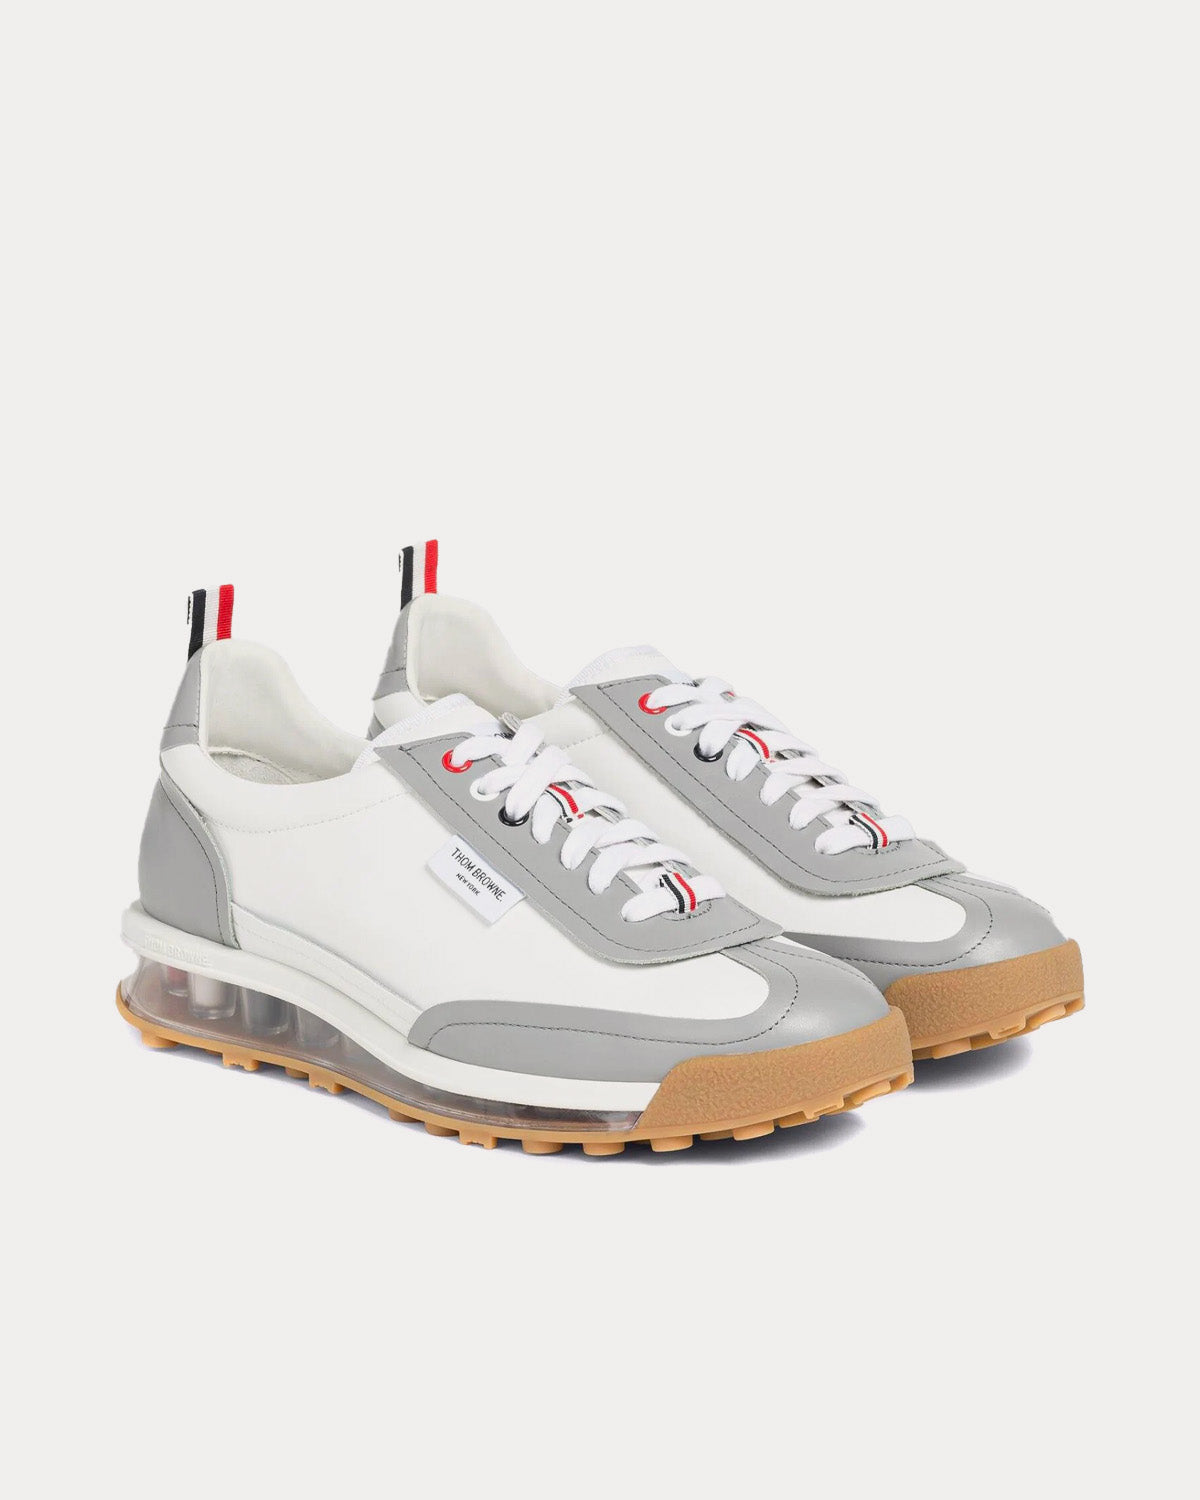 Thom Browne - Tech Runner Clear Sole Raw Edge Vitello Calf White / Grey Low Top Sneakers